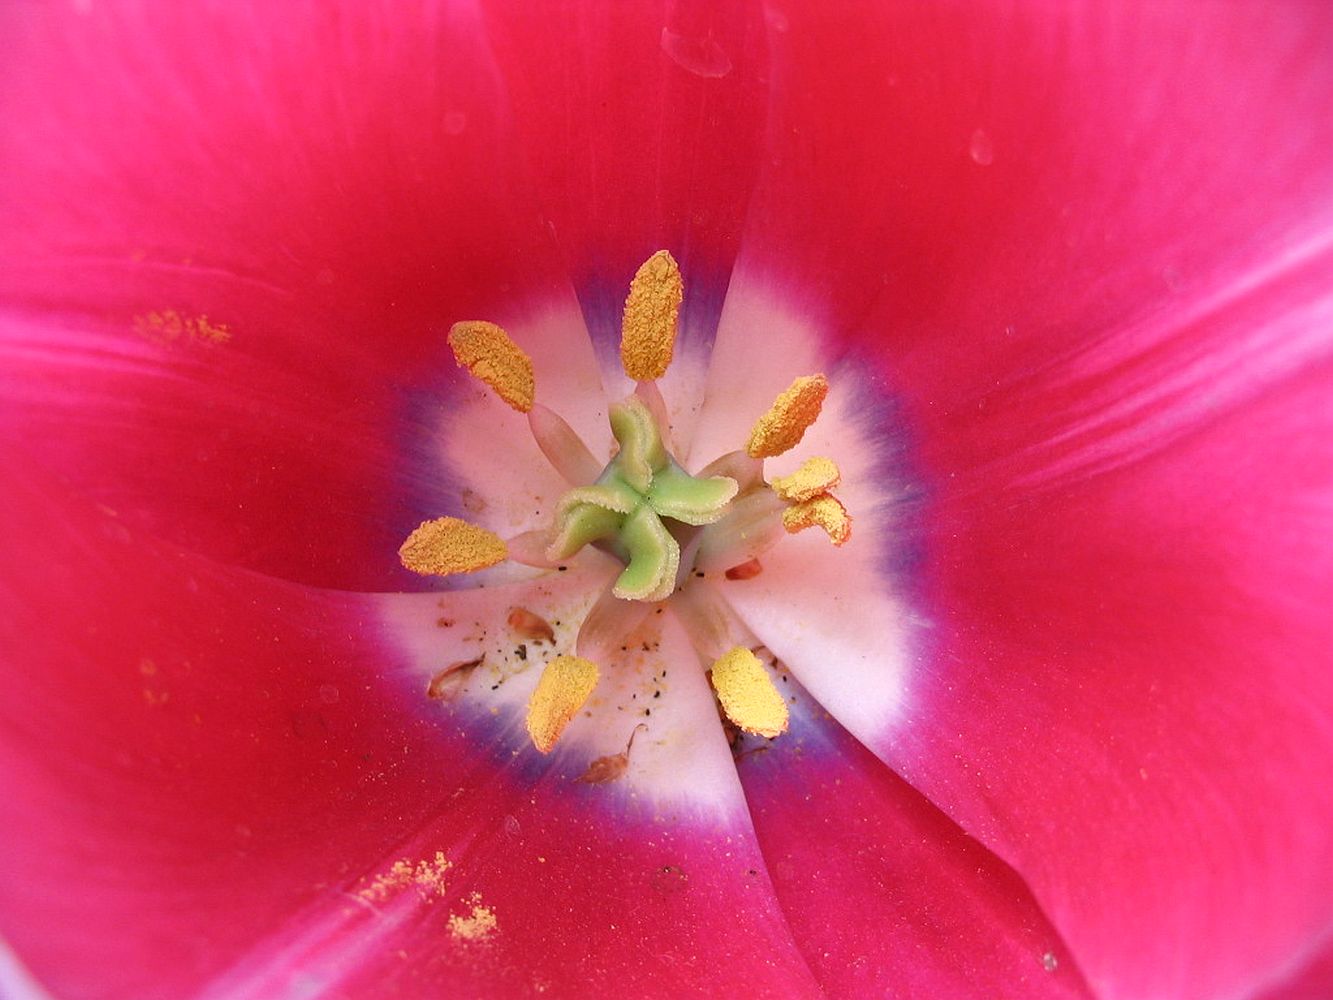 The center of the flower photo